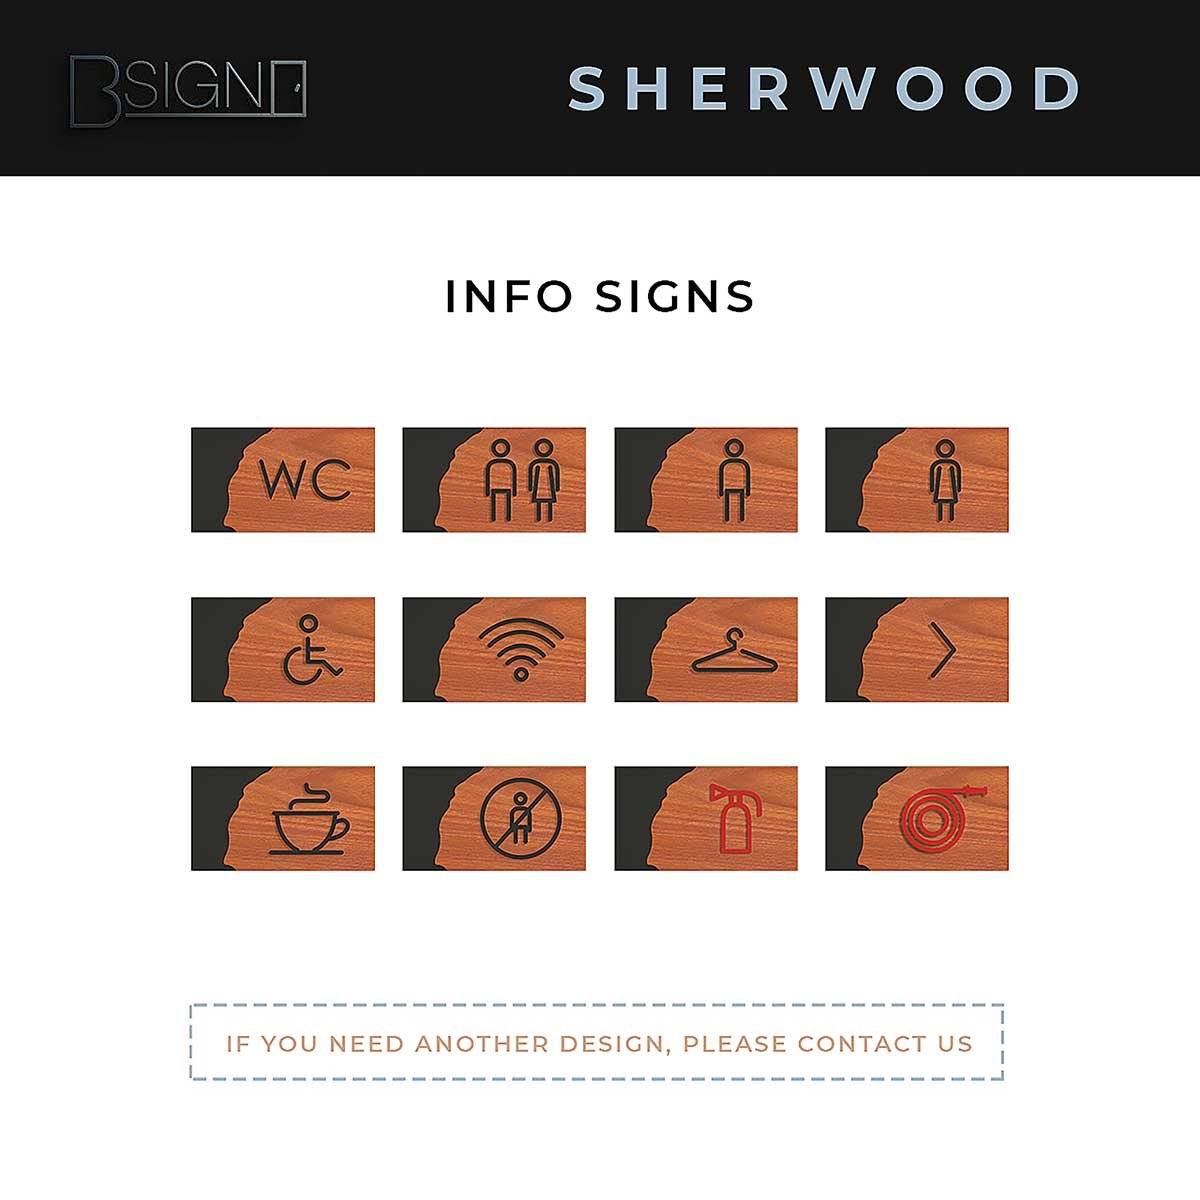 Information Signs - Wooden Sign With Fitness Room Icon "Sherwood" Design